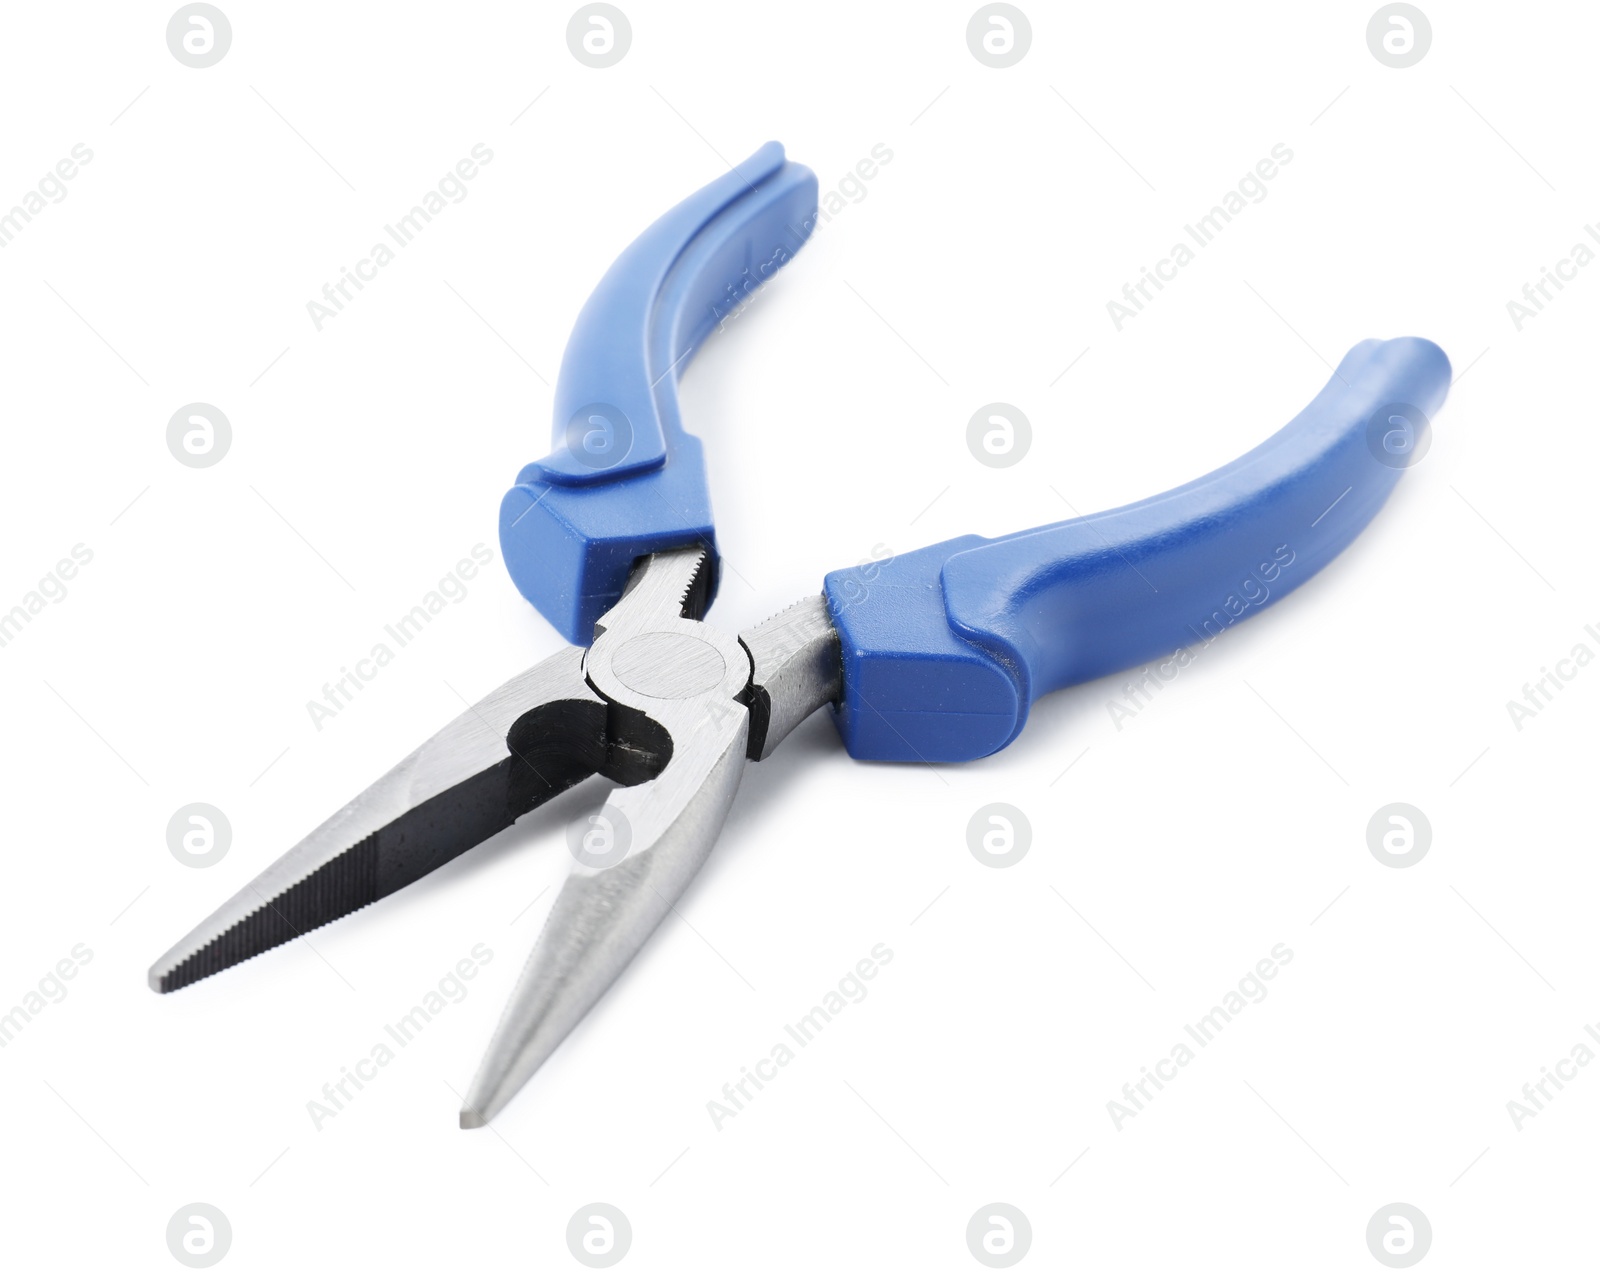 Photo of One needle nose pliers isolated on white